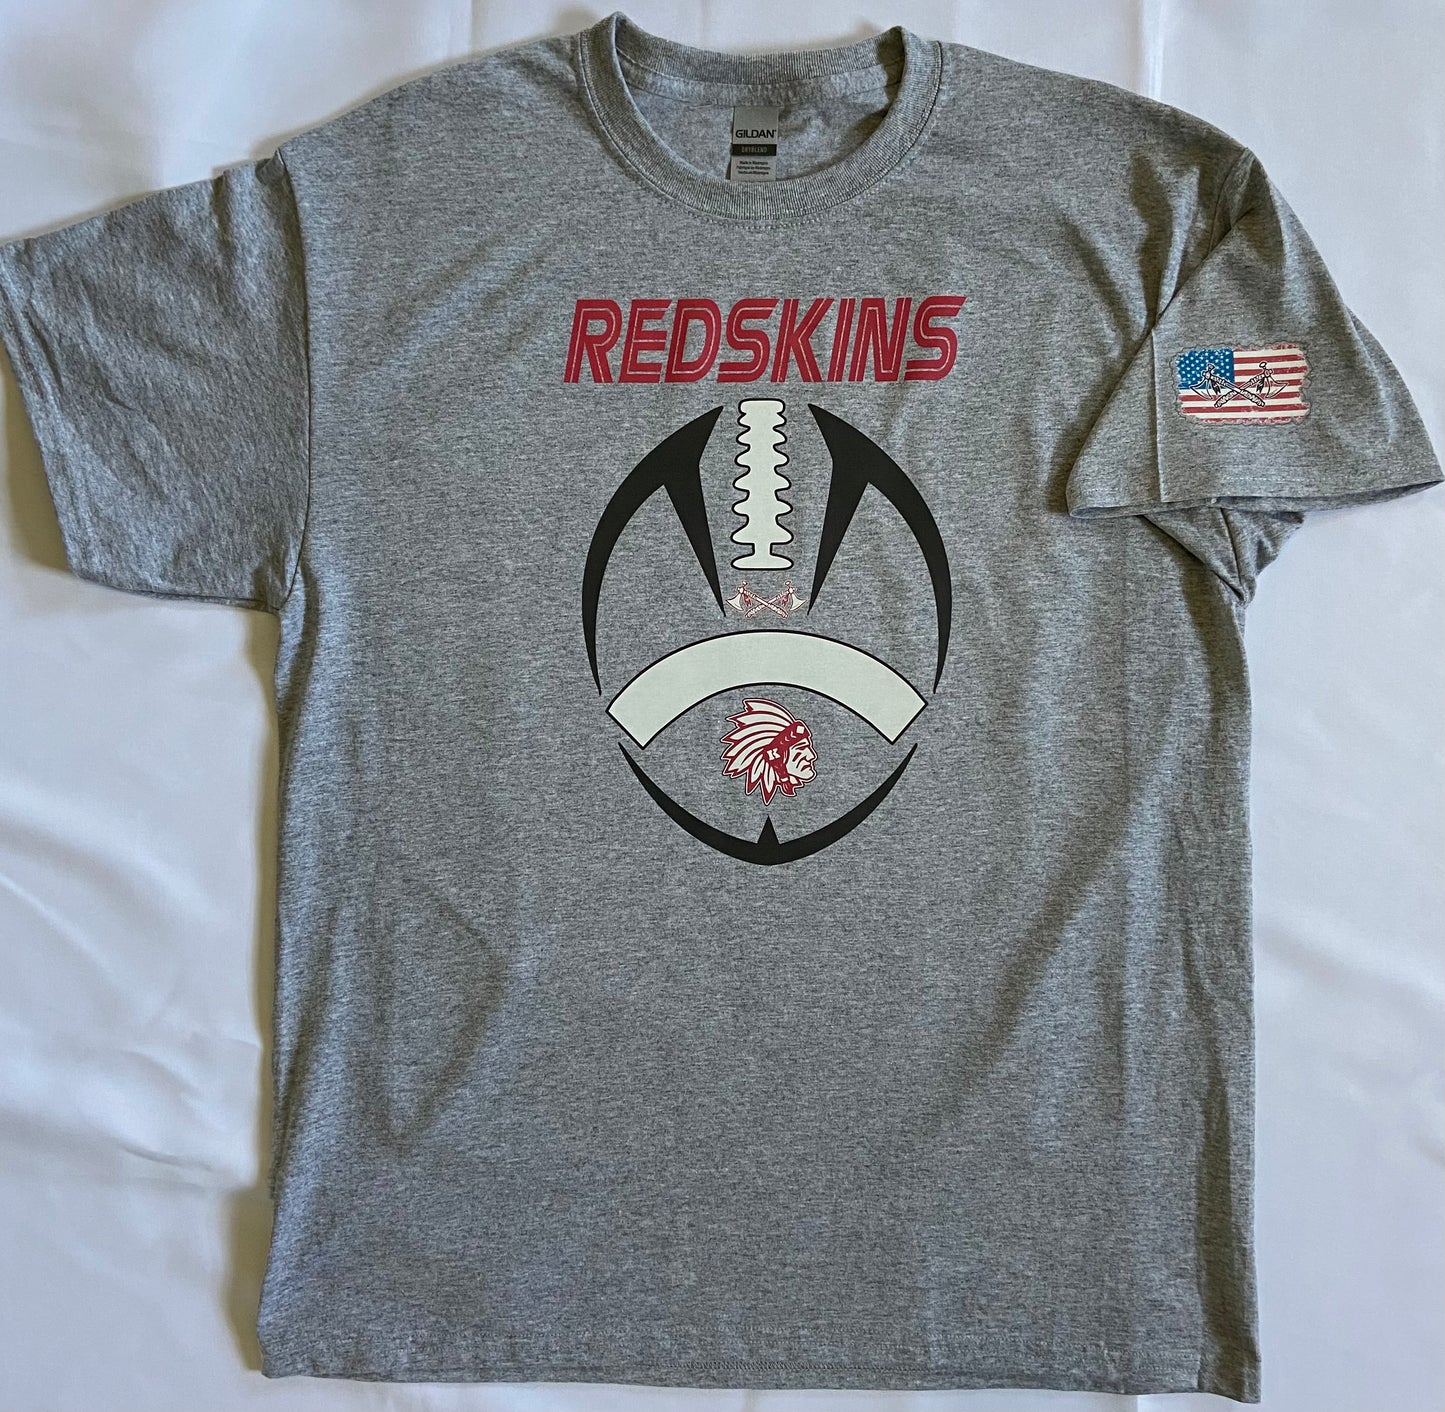 Knox Redskins Football - Adult and Youth Sizes available